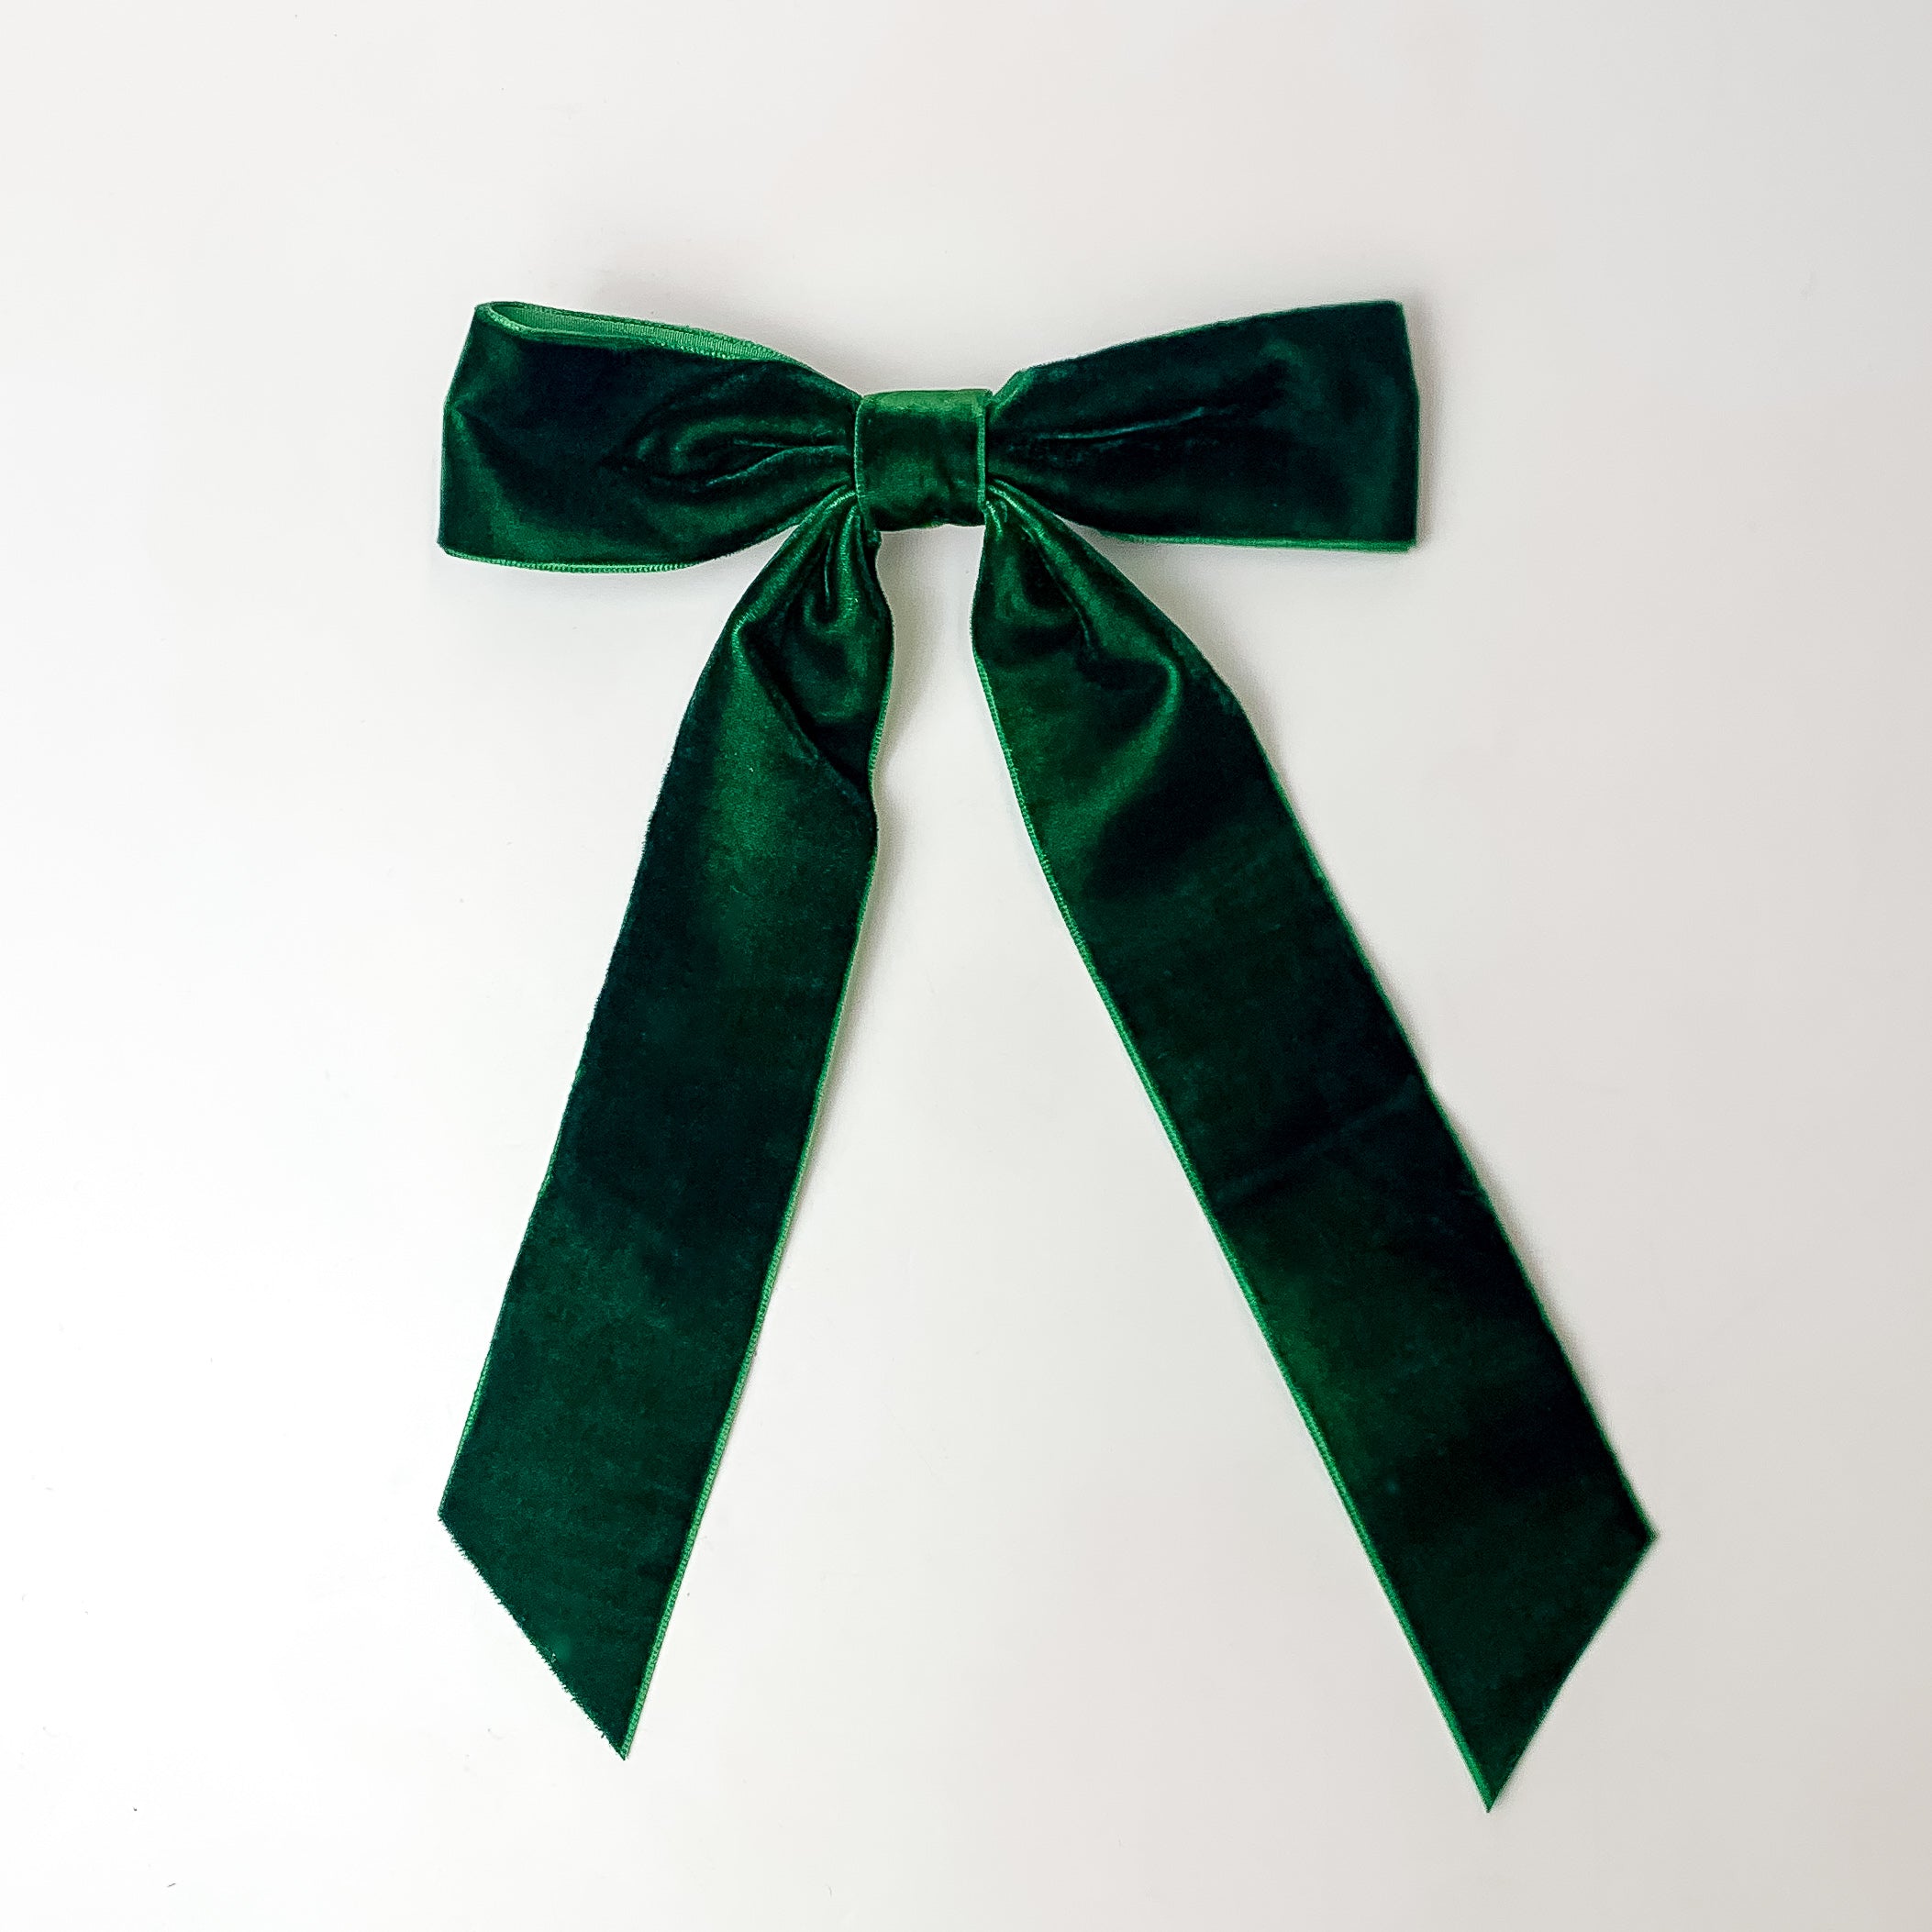 This beautiful emerald green bow is taken with a white background.